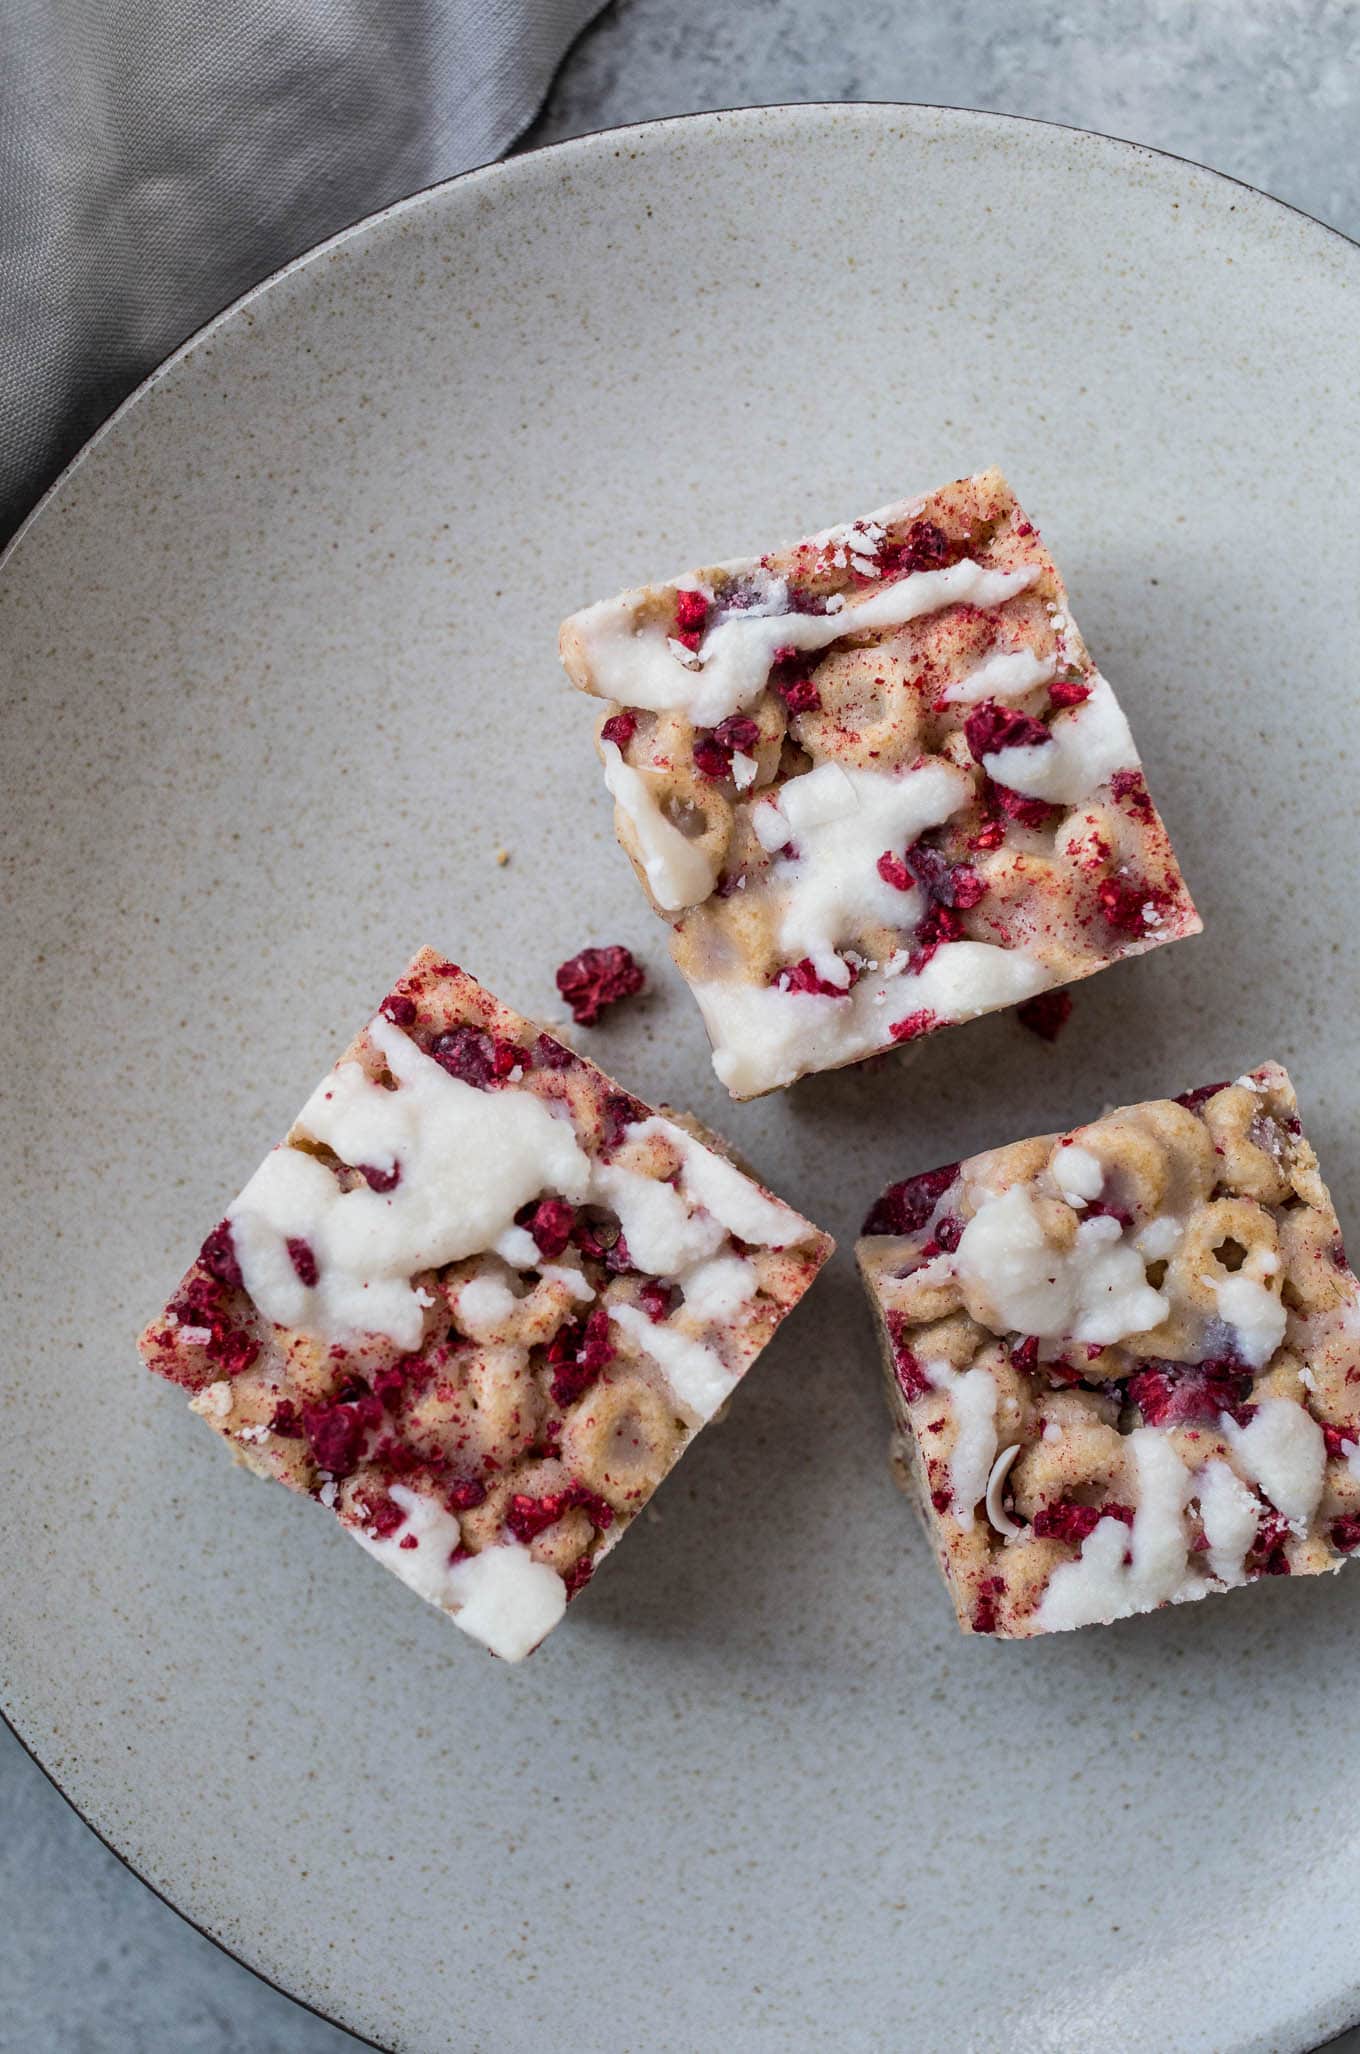 Raspberry Coconut Cereal Treats on plate